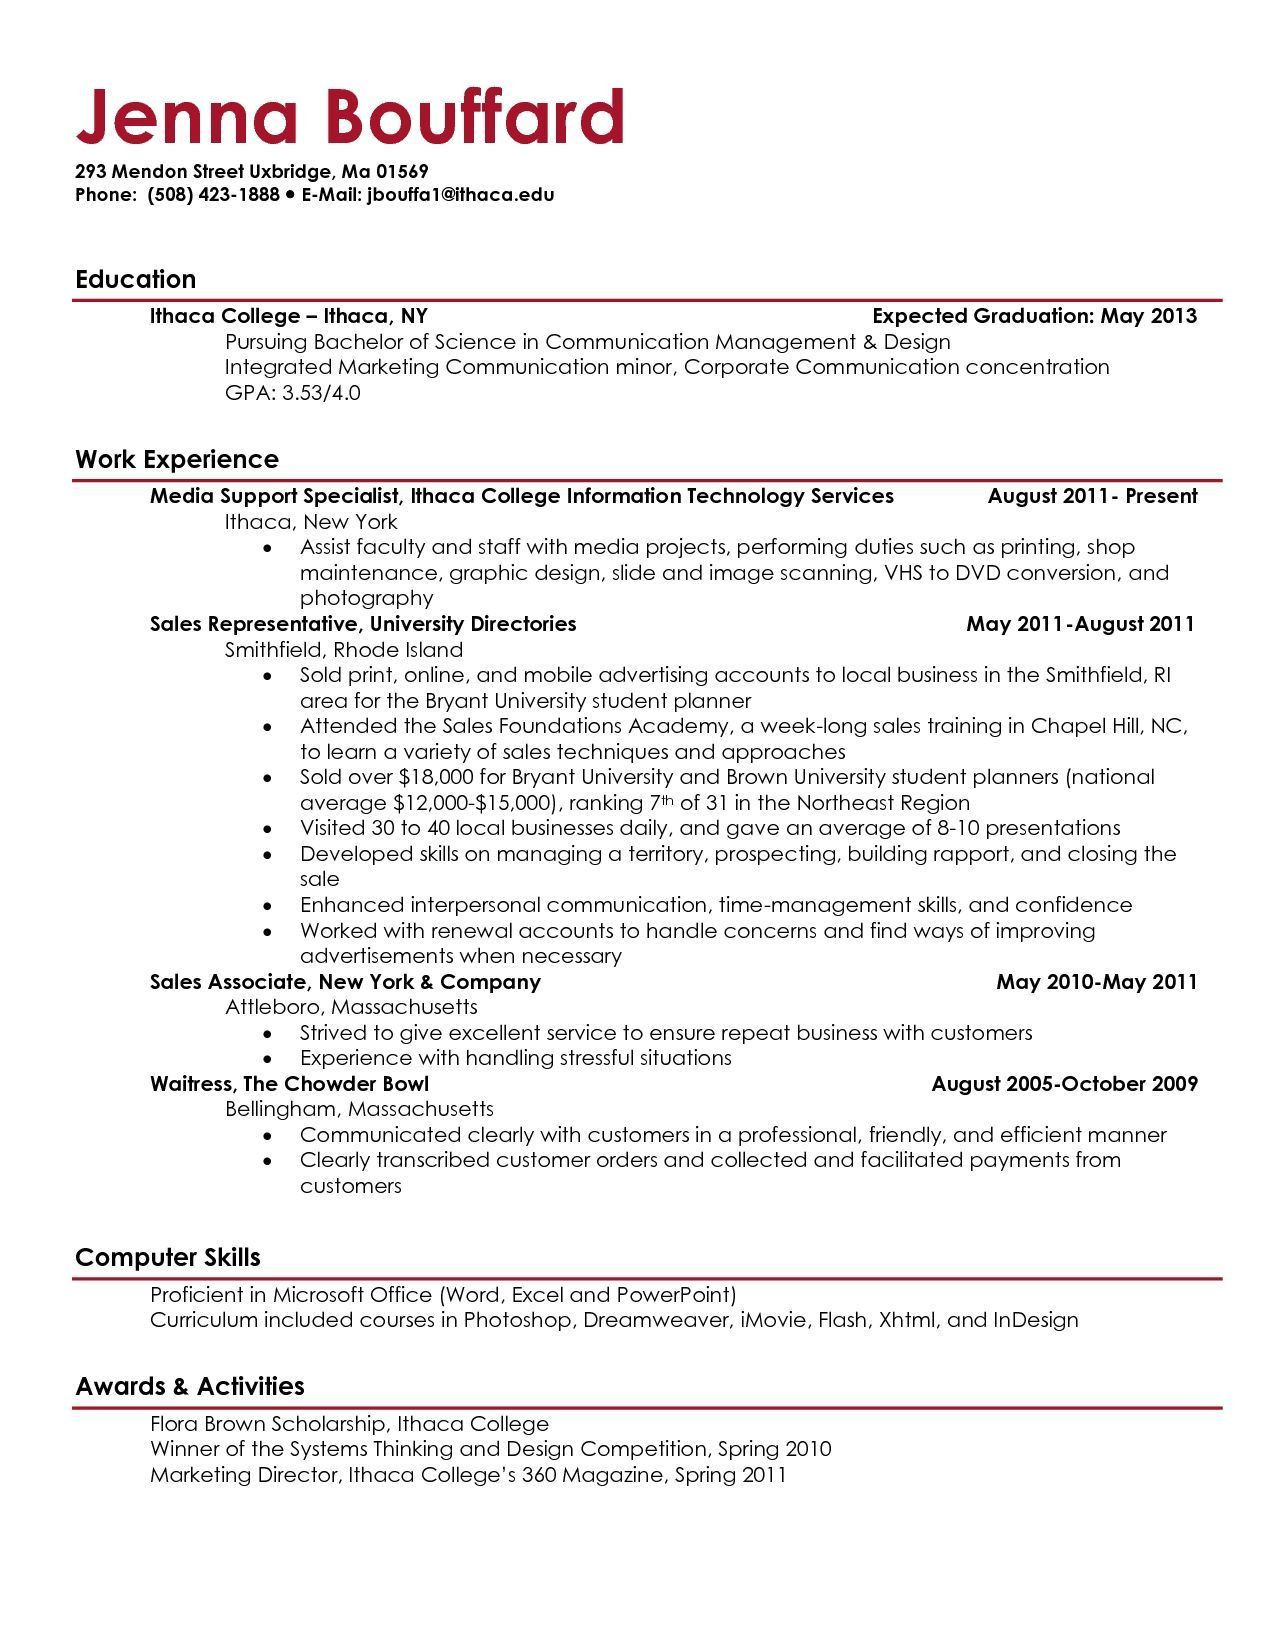 Best Resume Templates for College Students Resume Templates for College Students #college #resume …